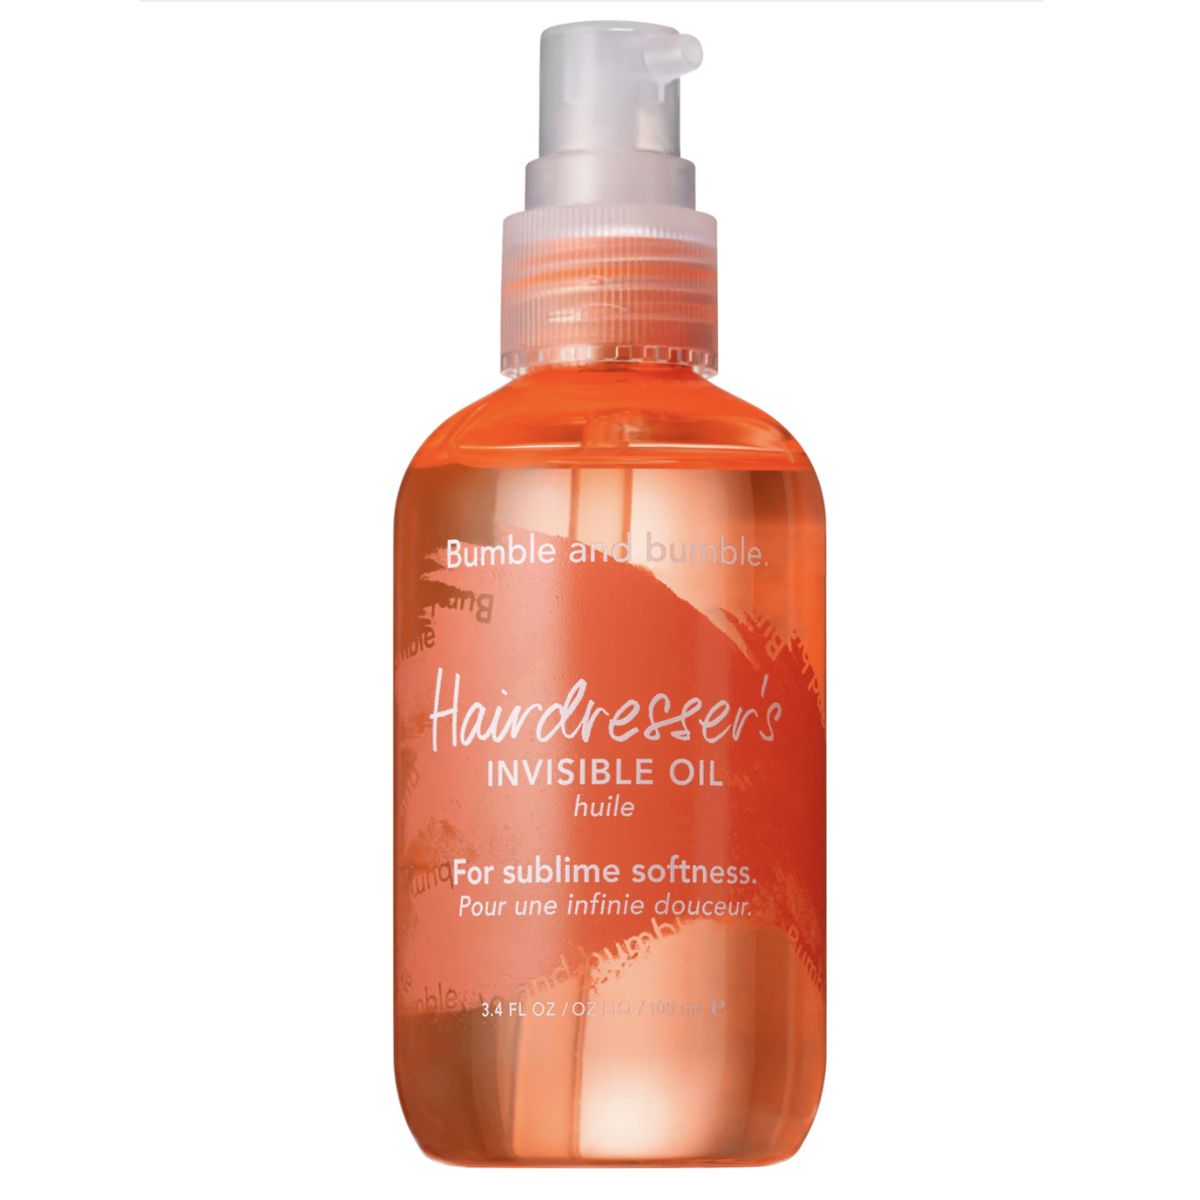 Best for Wavy Hair: Bumble and bumble Hairdresser's Invisible Oil